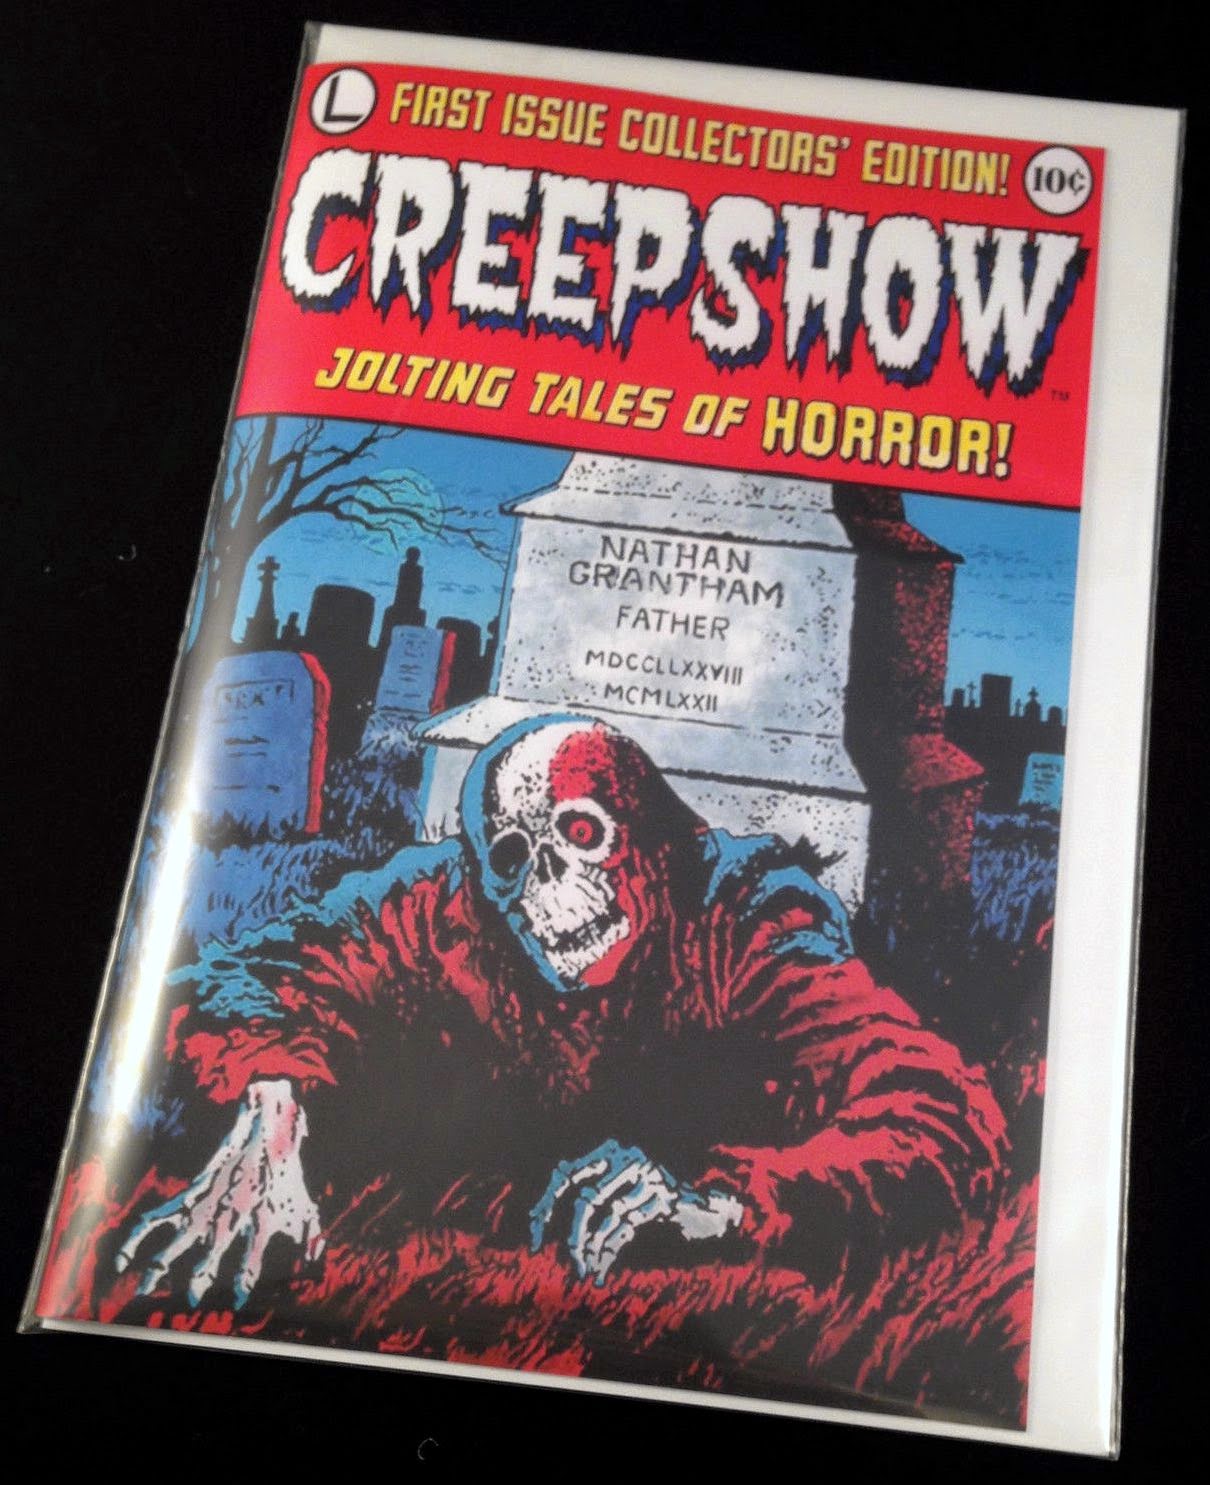 Creepshow Backgrounds on Wallpapers Vista